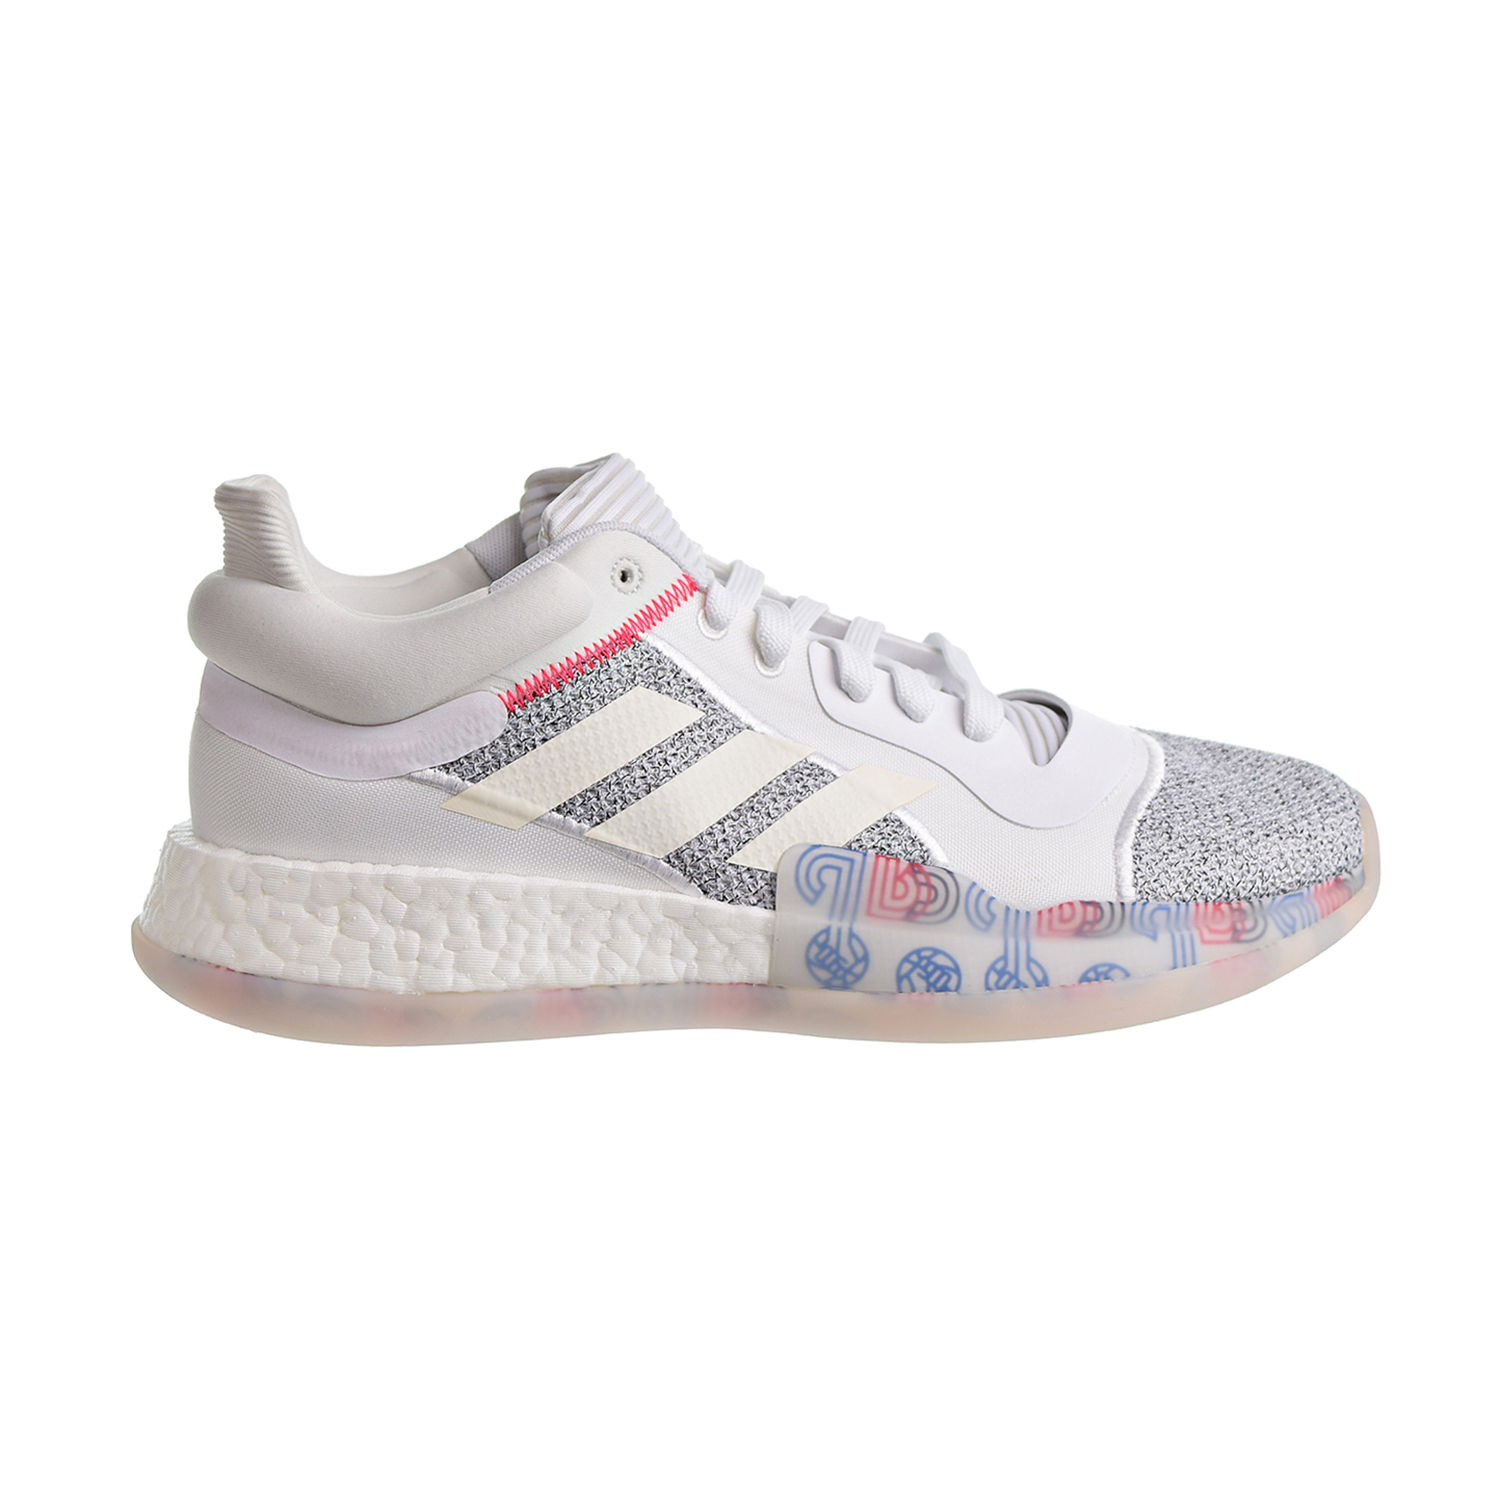 Adidas Marquee Boost Low Men's 